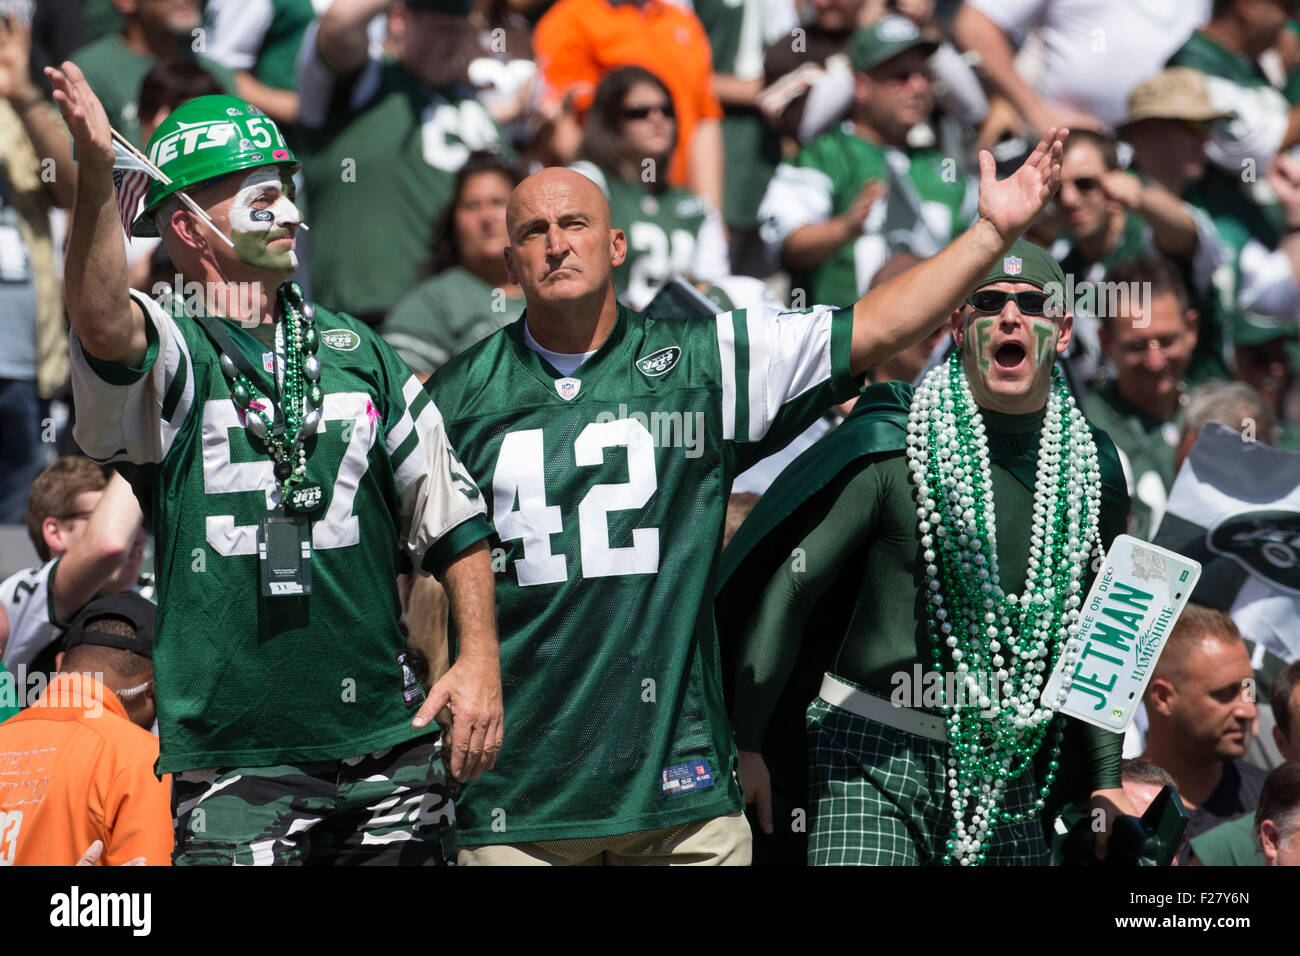 East Rutherford, New Jersey, USA. 13th Sep, 2015. New York Jets Fan Fireman Ed reacts with two other fans prior to the NFL game between the Cleveland Browns and the New York Jets at MetLife Stadium in East Rutherford, New Jersey. The New York Jets won 31-10. Christopher Szagola/CSM/Alamy Live News Stock Photo